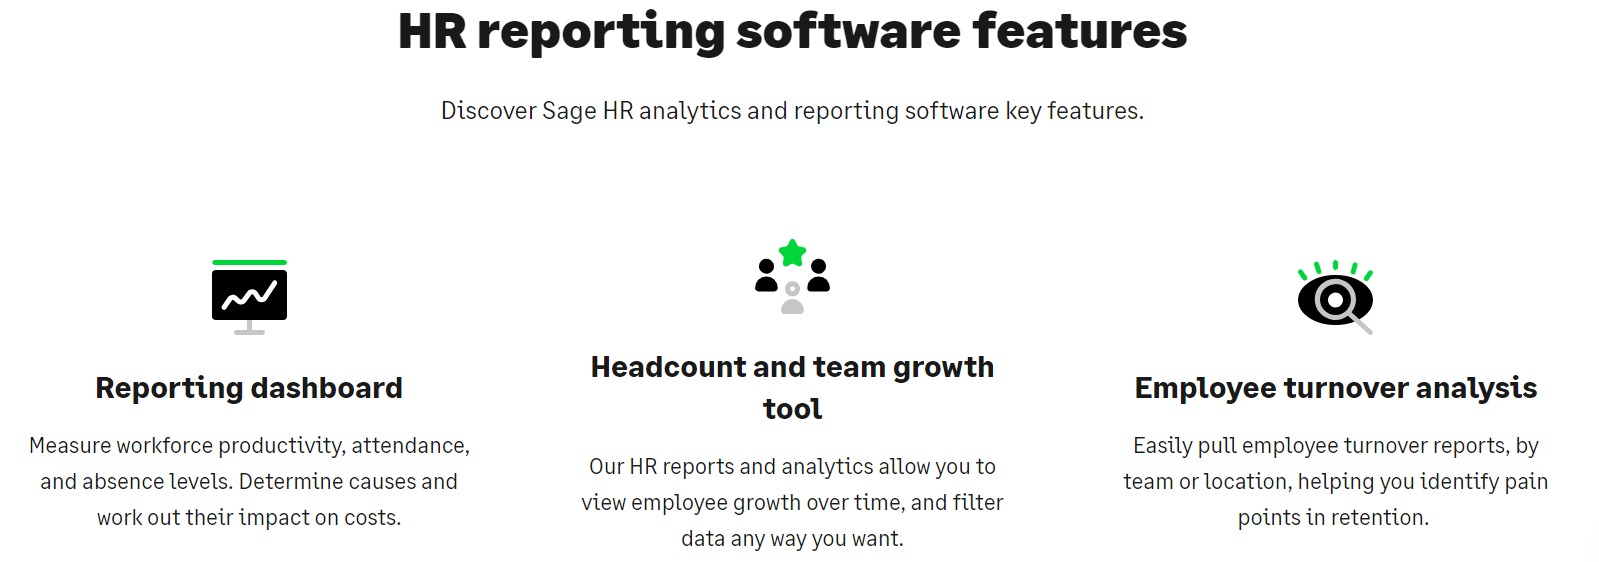 HR Reporting Software Features